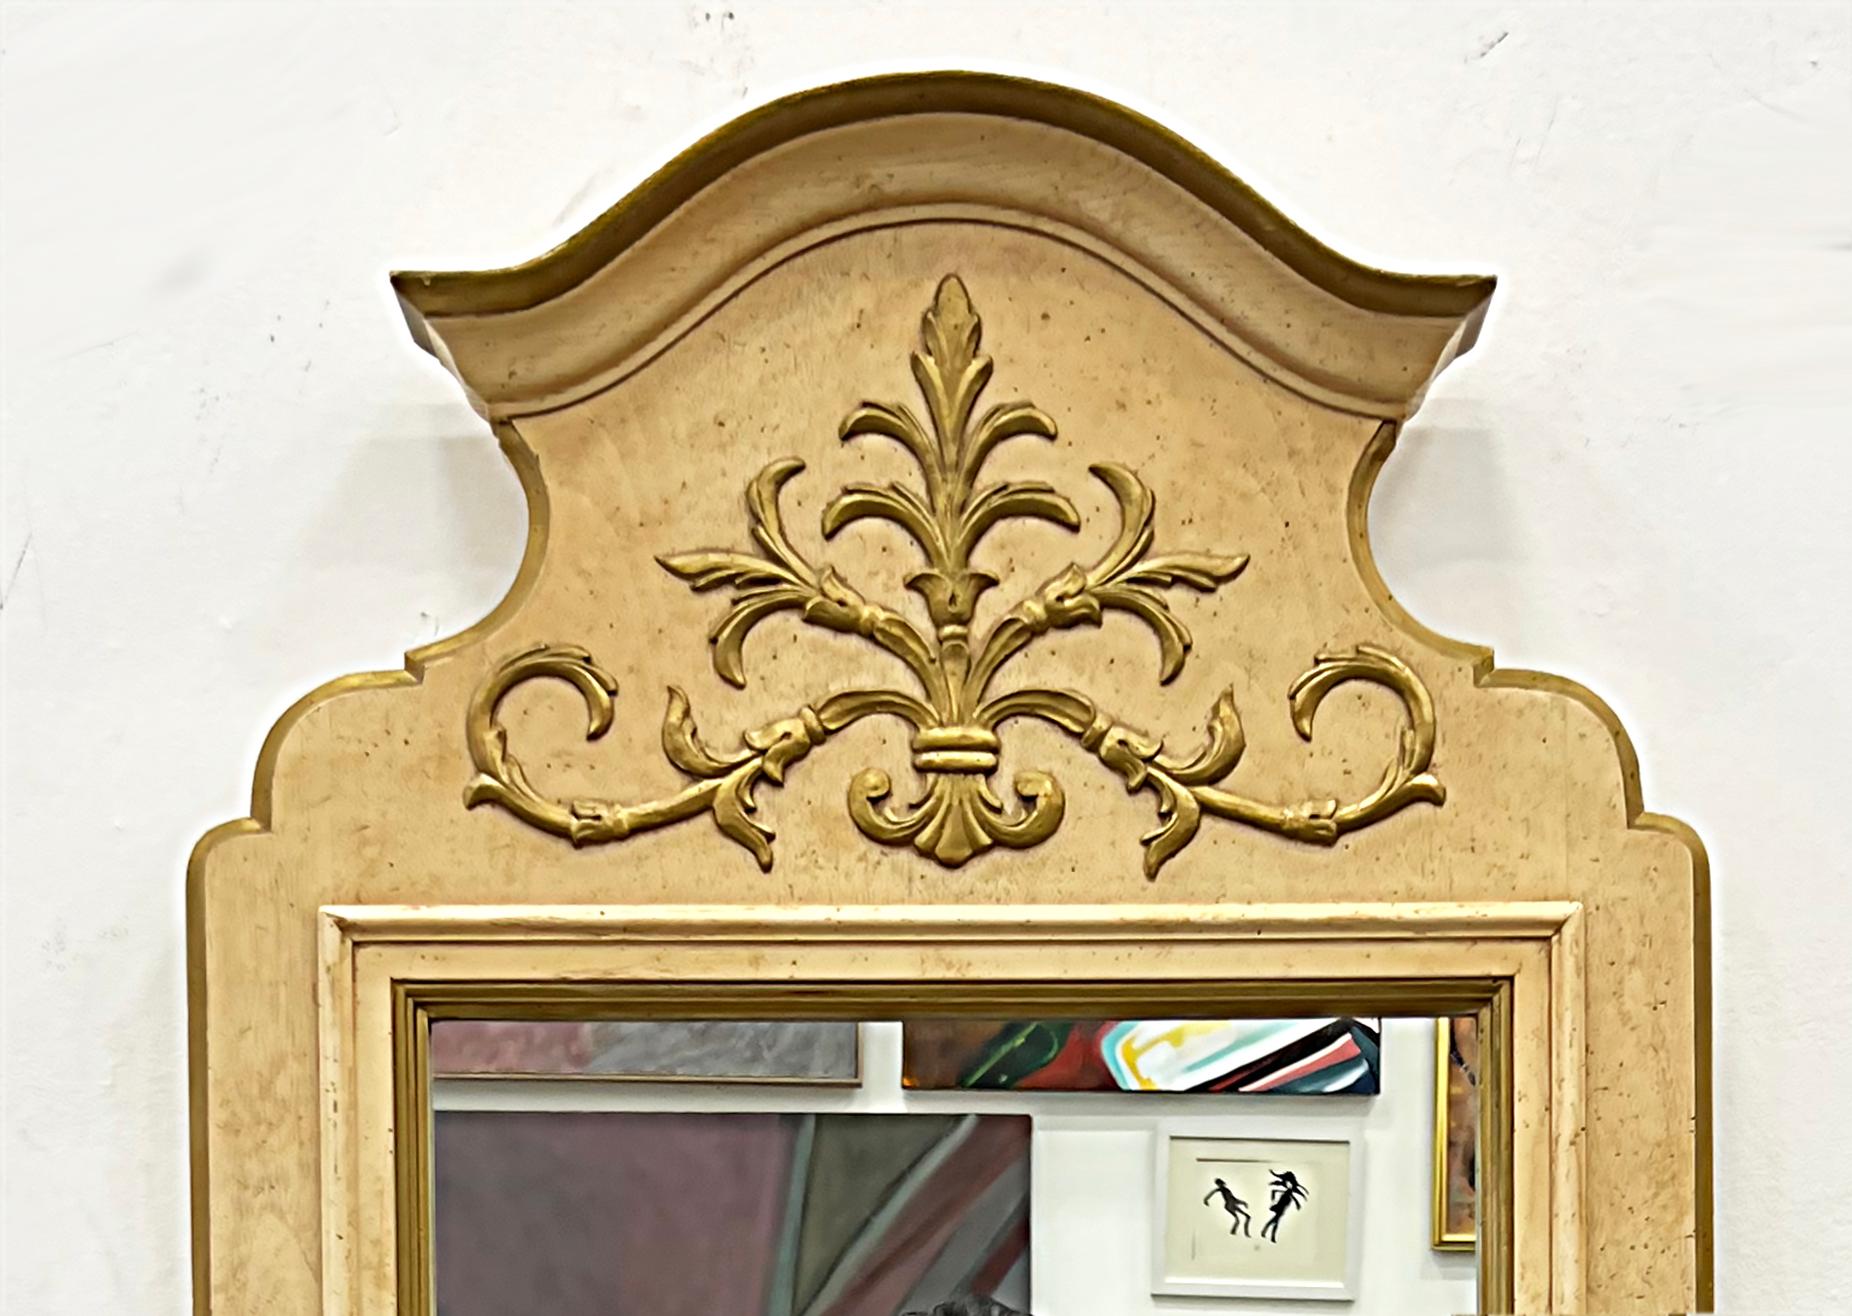 French Neoclassical style wood mirrors, 1960s American Made, Pair. 

Offered for sale is a pair of French Neoclassical style wood mirrors that were made in America during the 1960s. The mirrors have gold painted details against a cerused finish